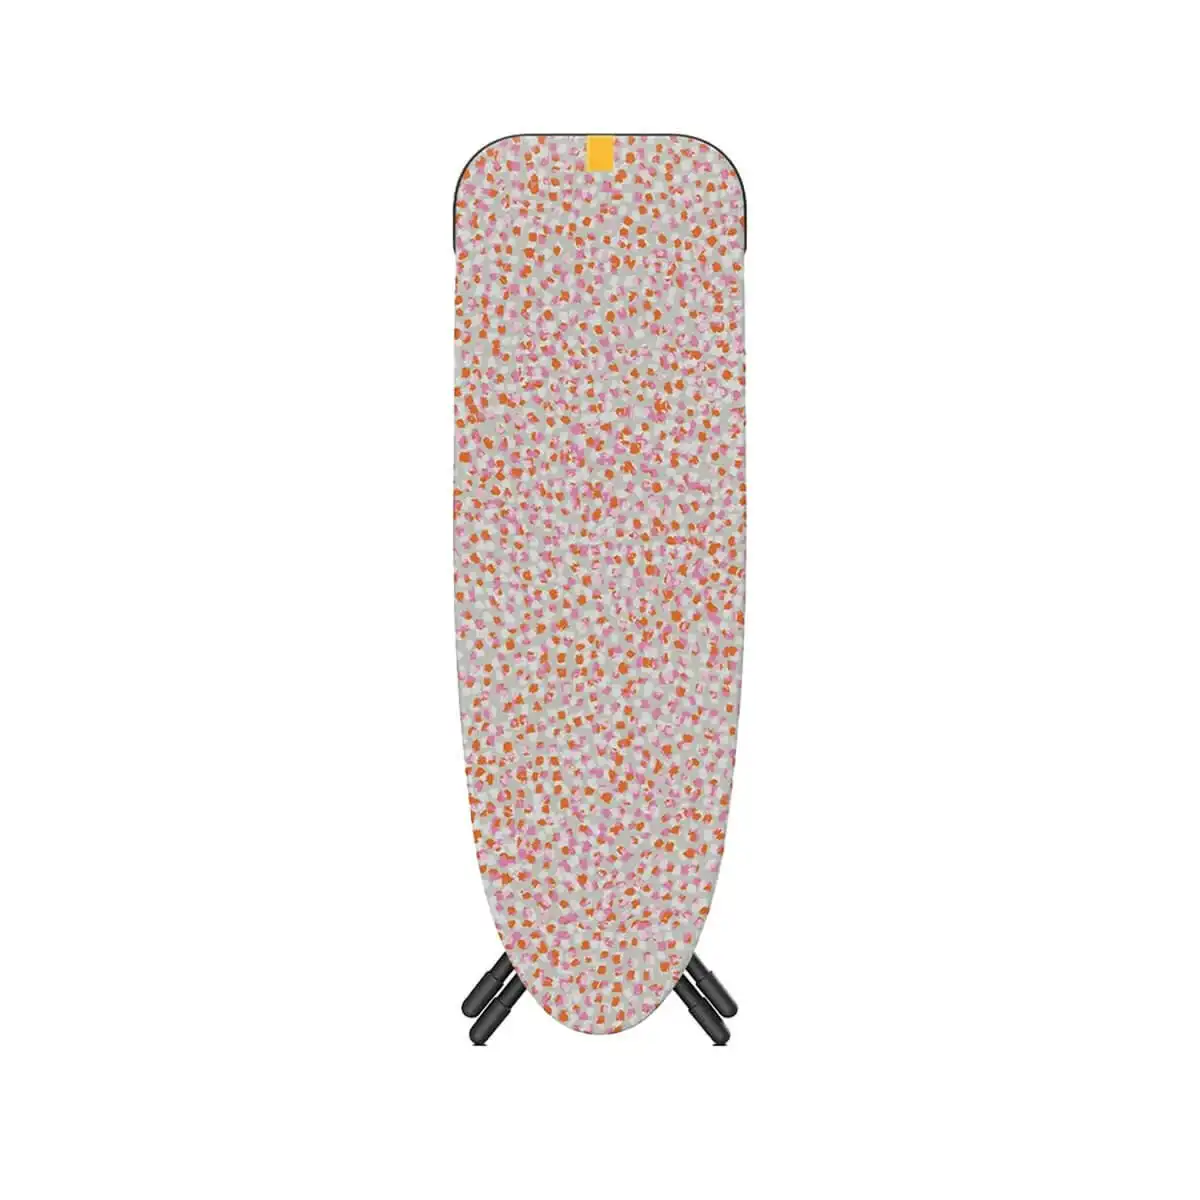 Joseph Joseph Glide Max Large easy-store Ironing Board with Extra-large Retractable Steam Iron Rest - Peach Blossom